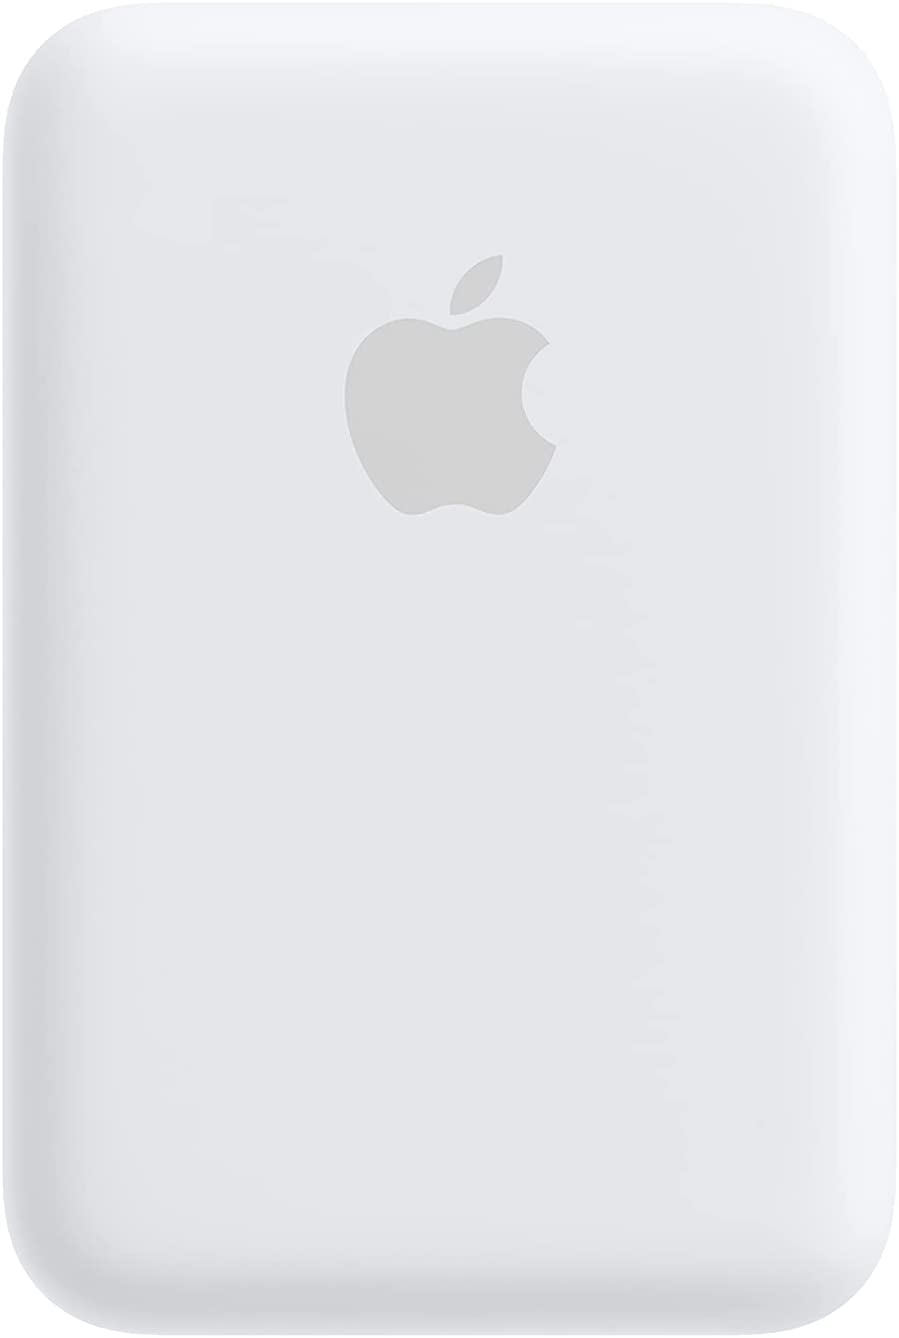 Apple MagSafe Battery Pack (Refurbished) for iPhone 12, 13, 14 $48